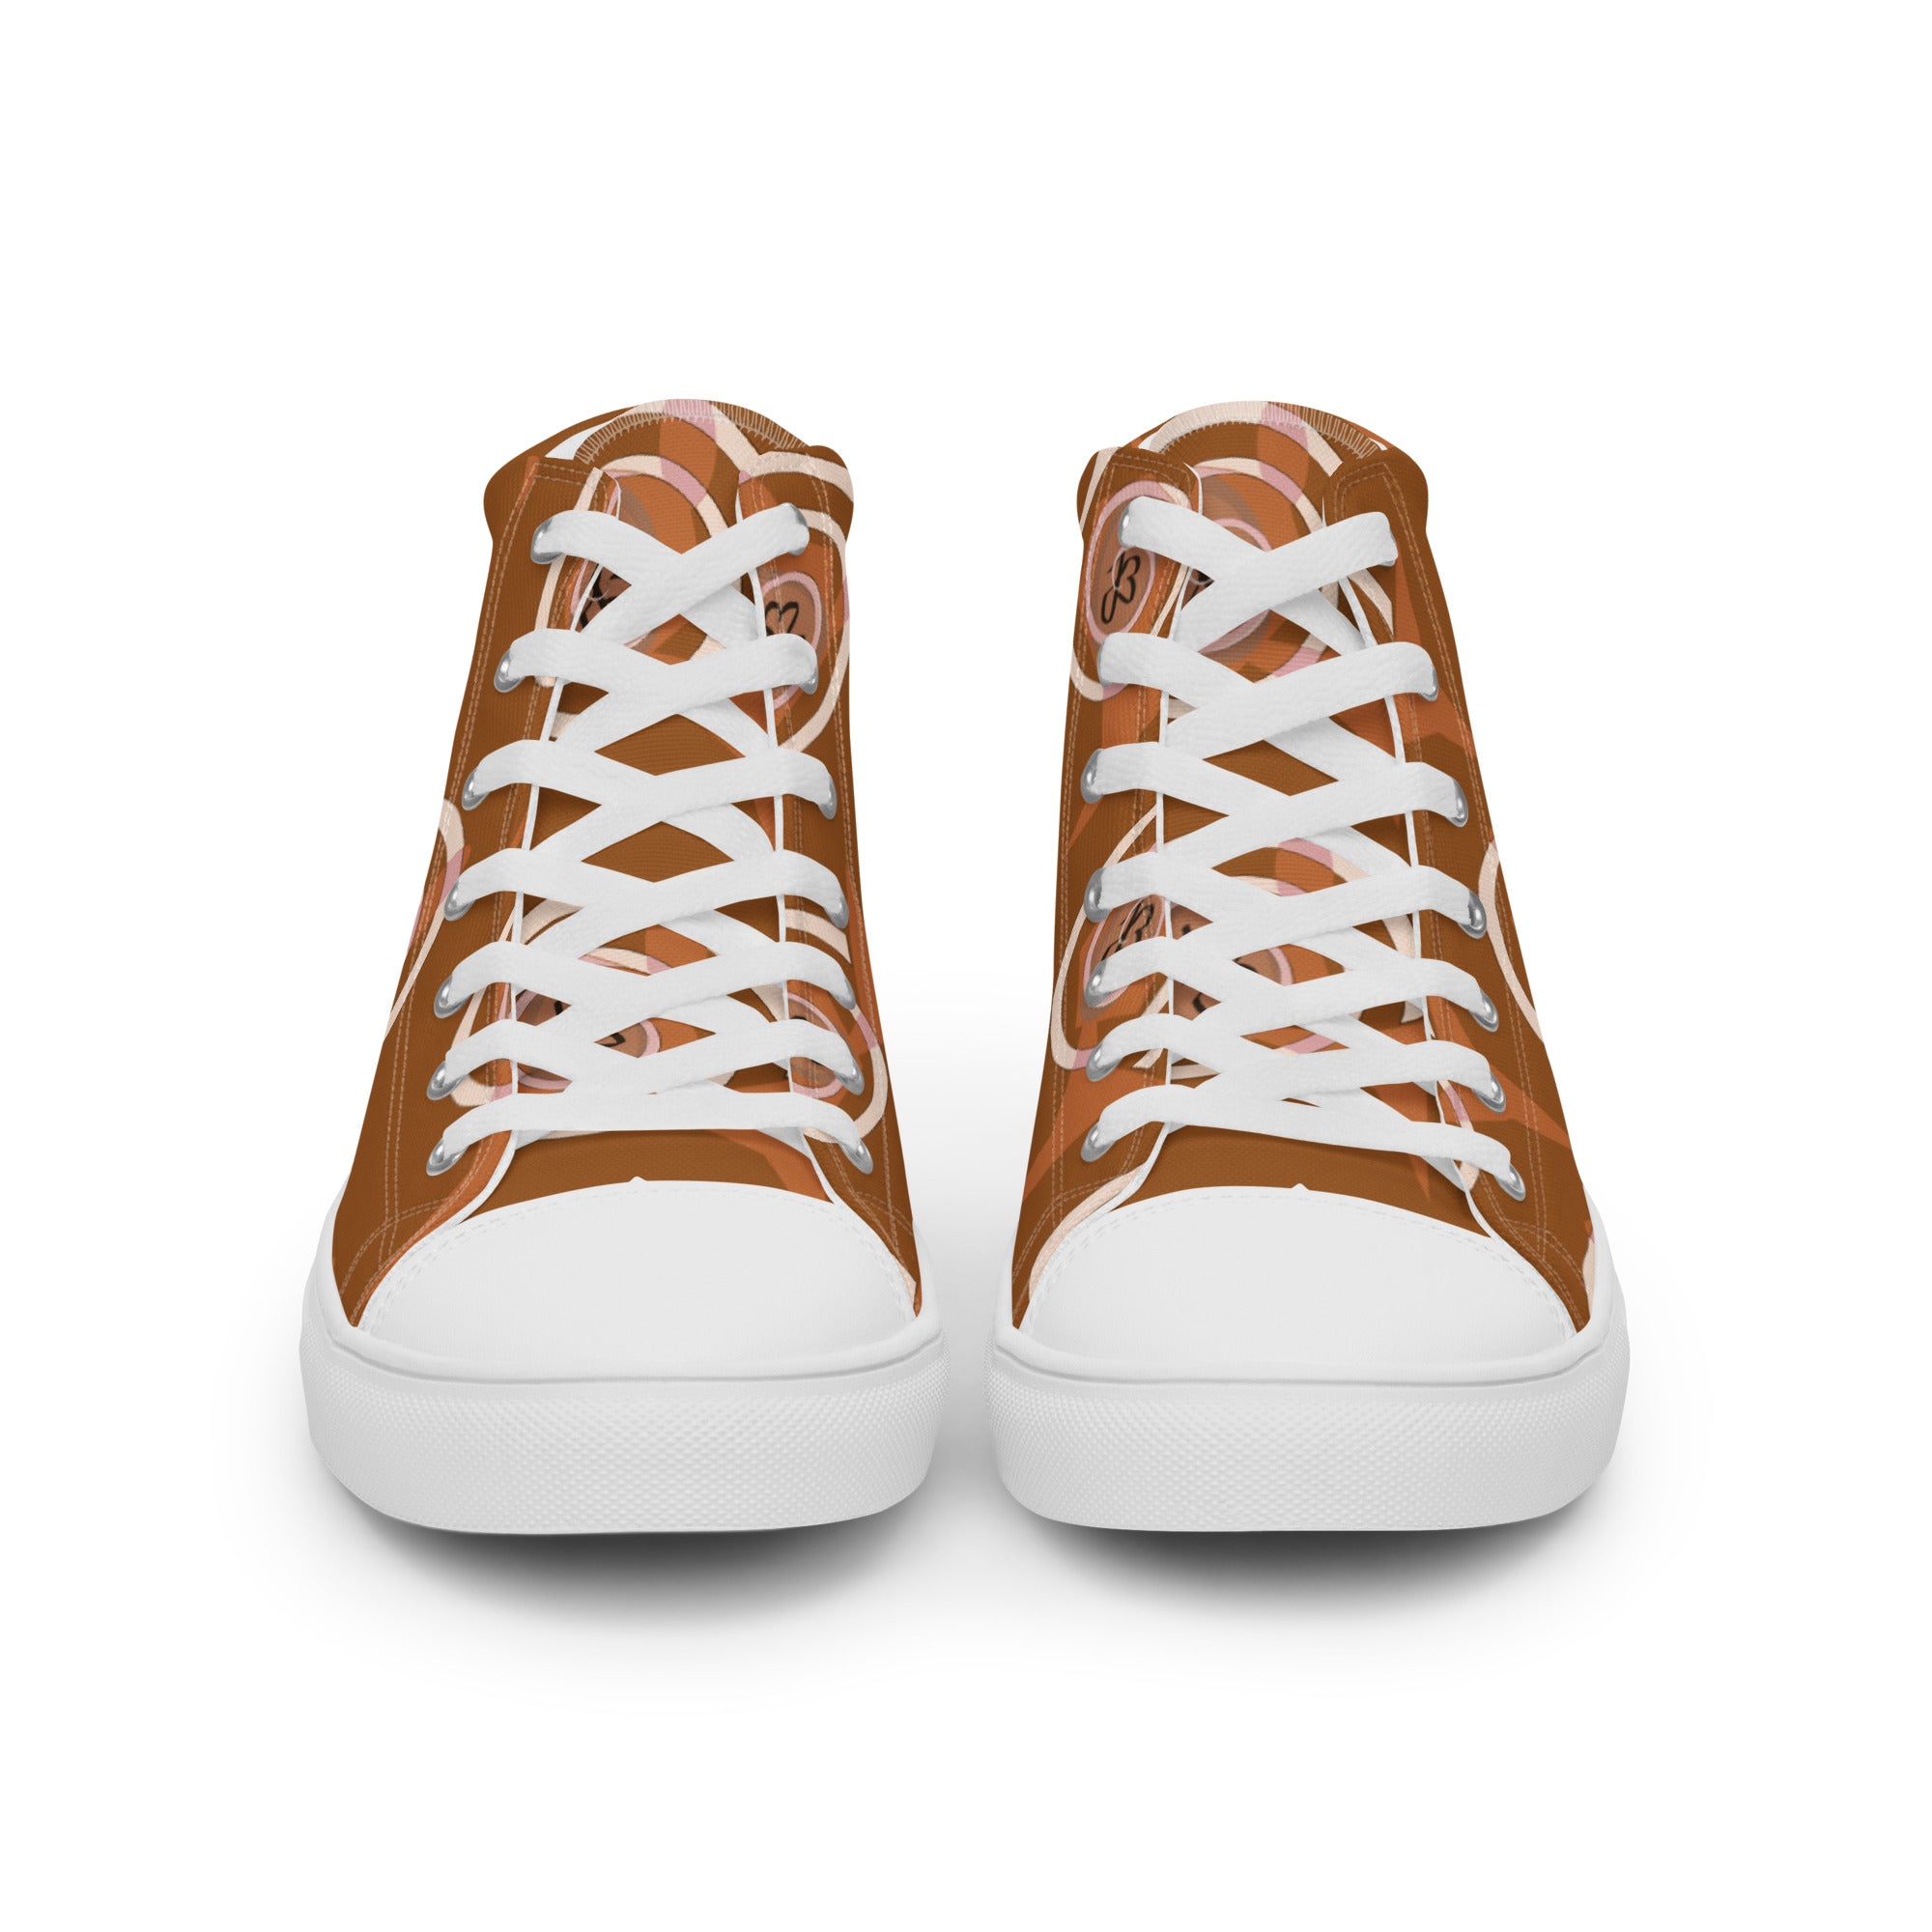 AJBeneficial Men’s high top canvas shoes in Rich Gold